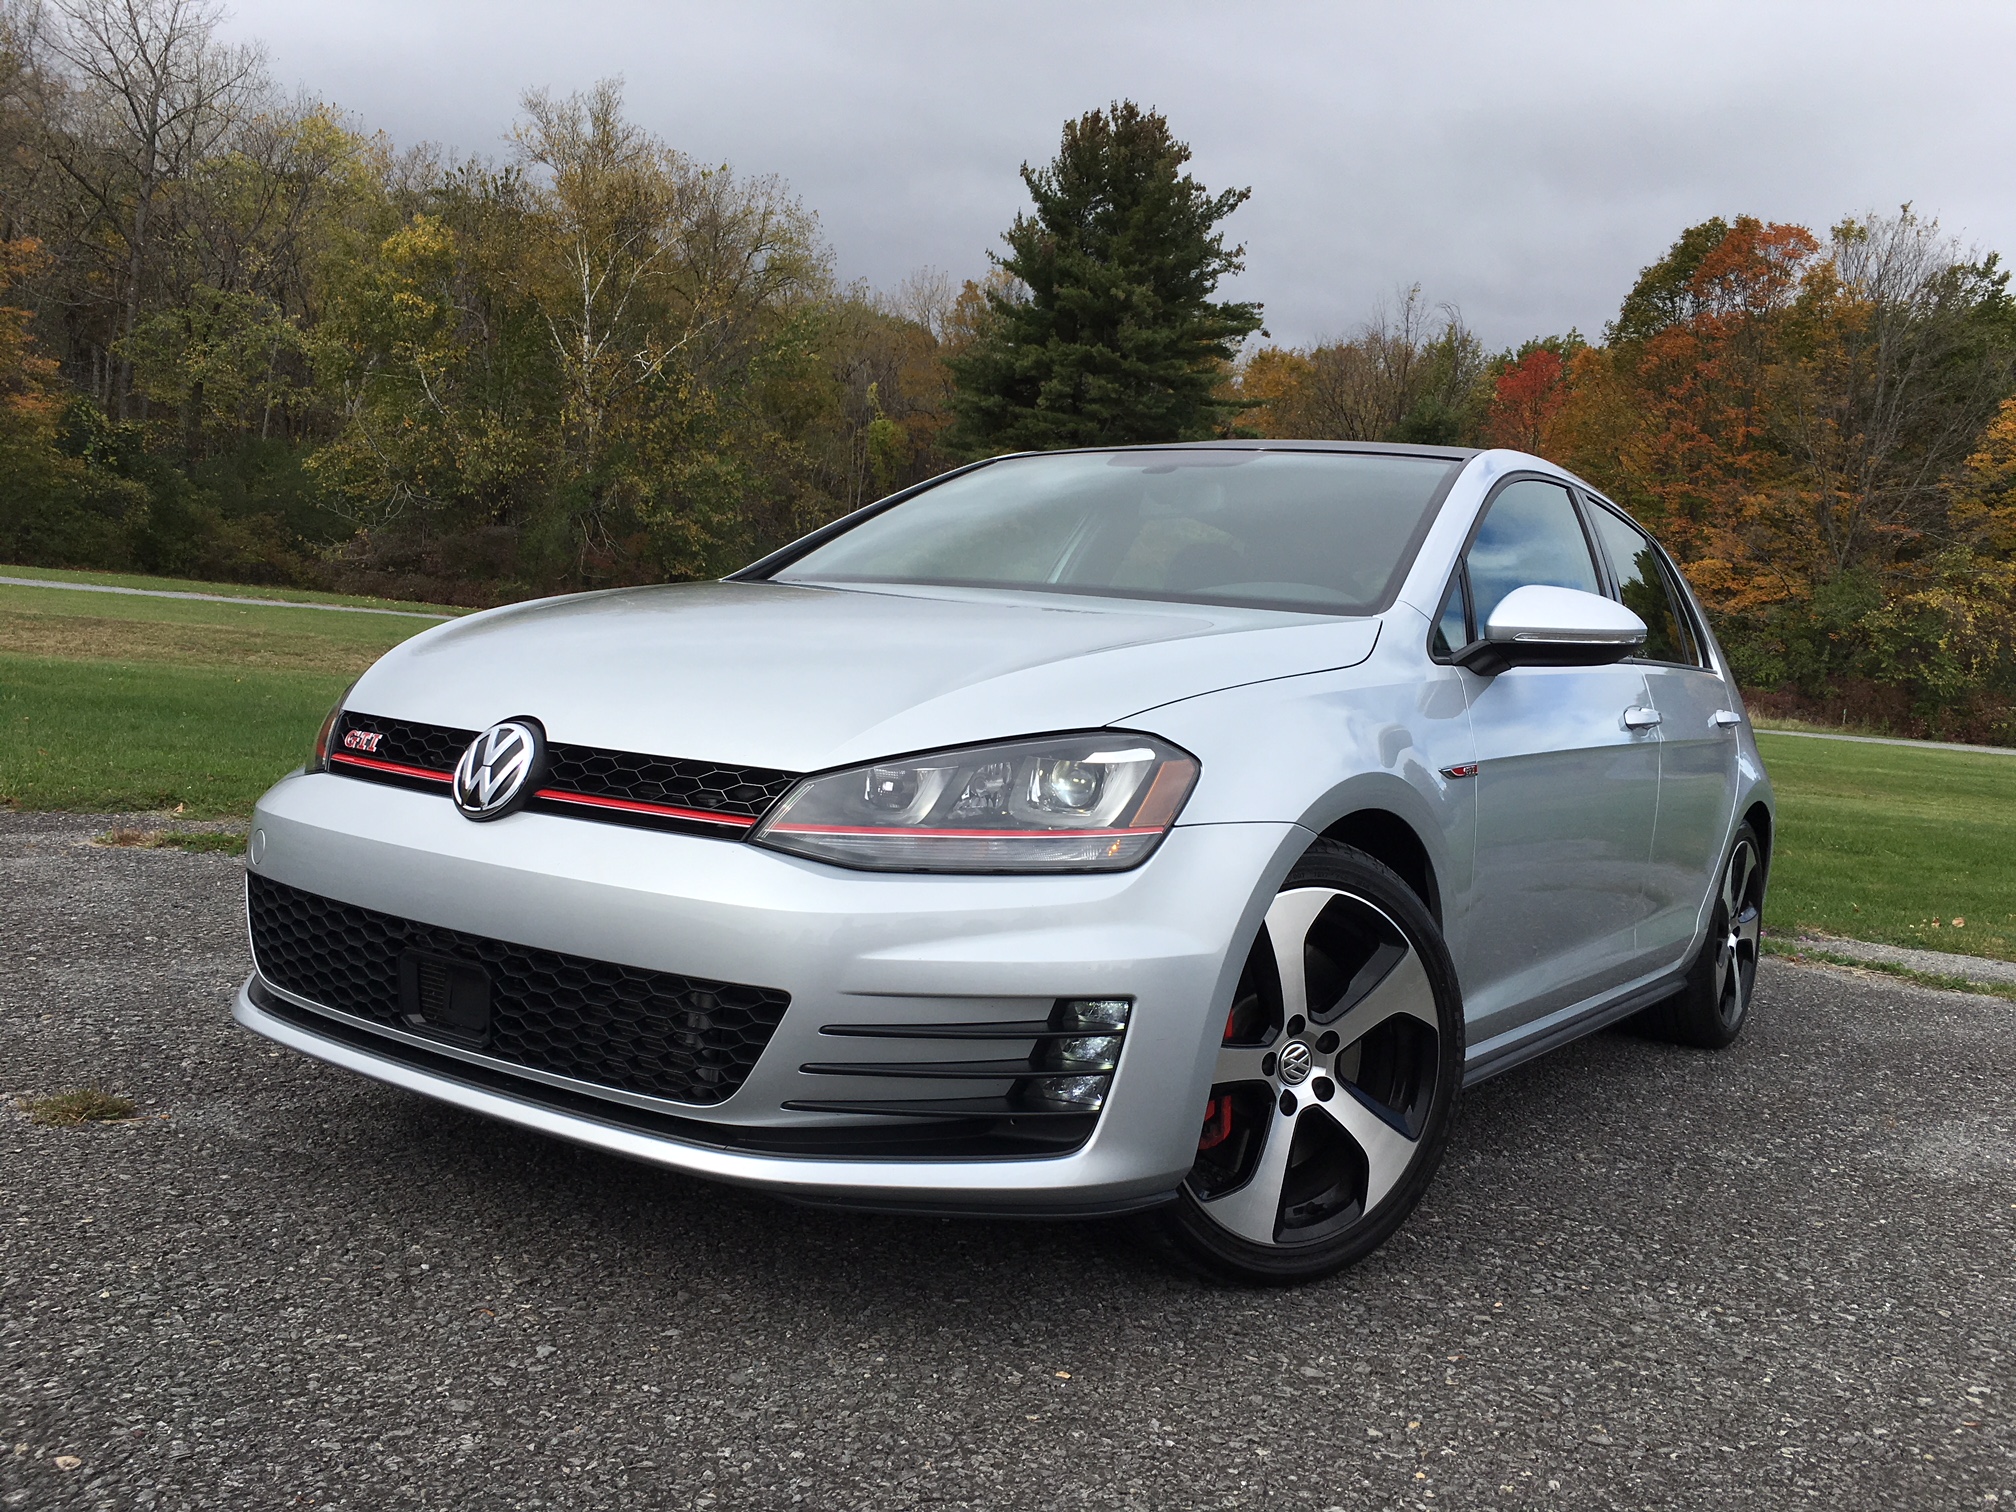 Volkswagen Golf GTI Review by Auto Critic Hammes